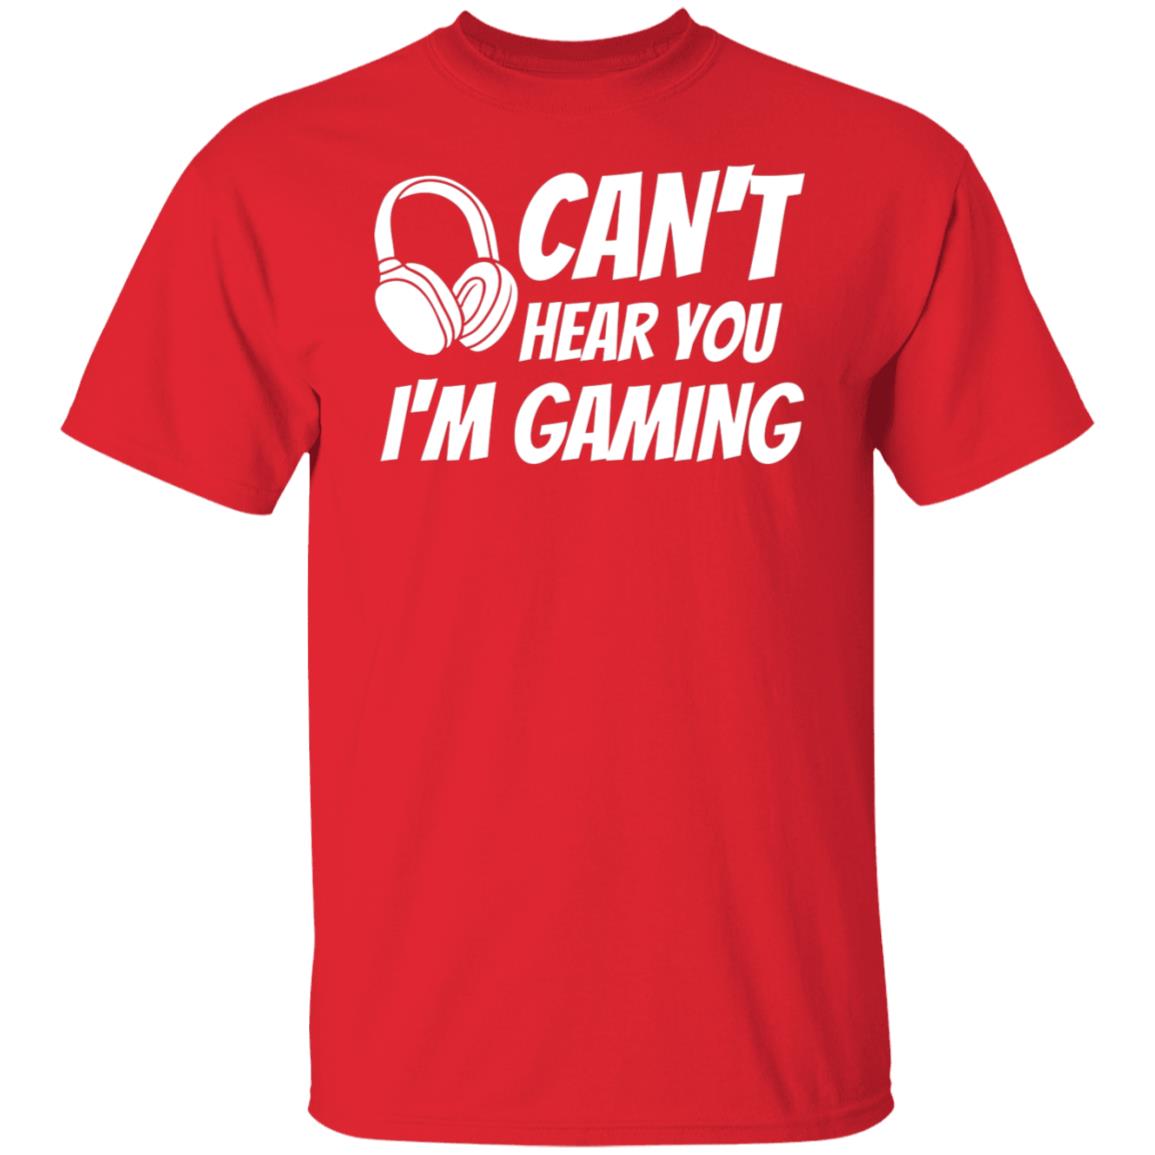 I Can't Here You I'm Gaming Sarcastic Funny Gamer Video Game Tee T-Shirt